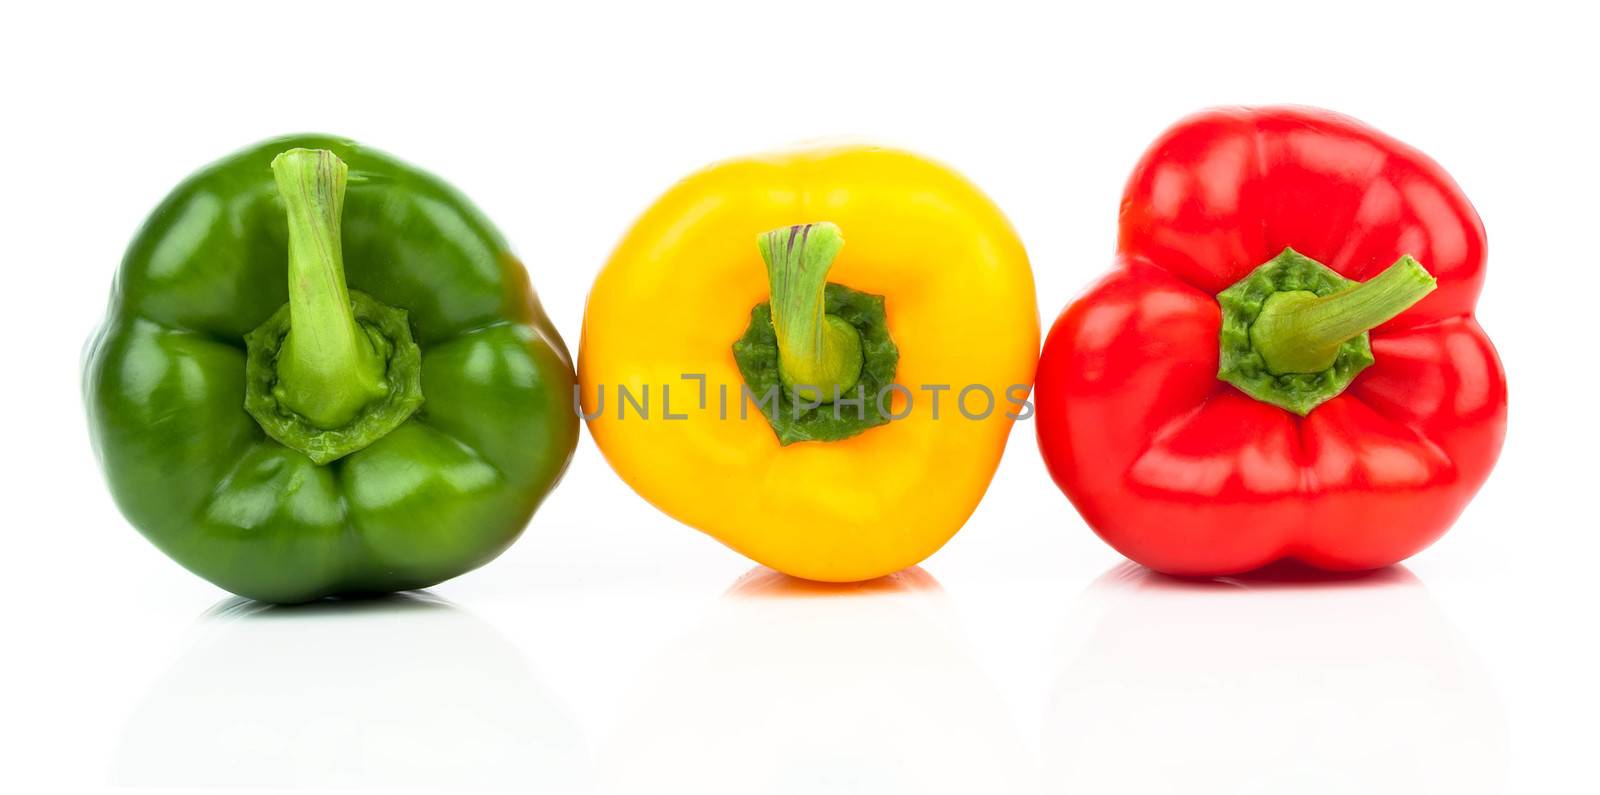 Paprika is a cultivar of the species Capsicum annuum paprika yie by motorolka